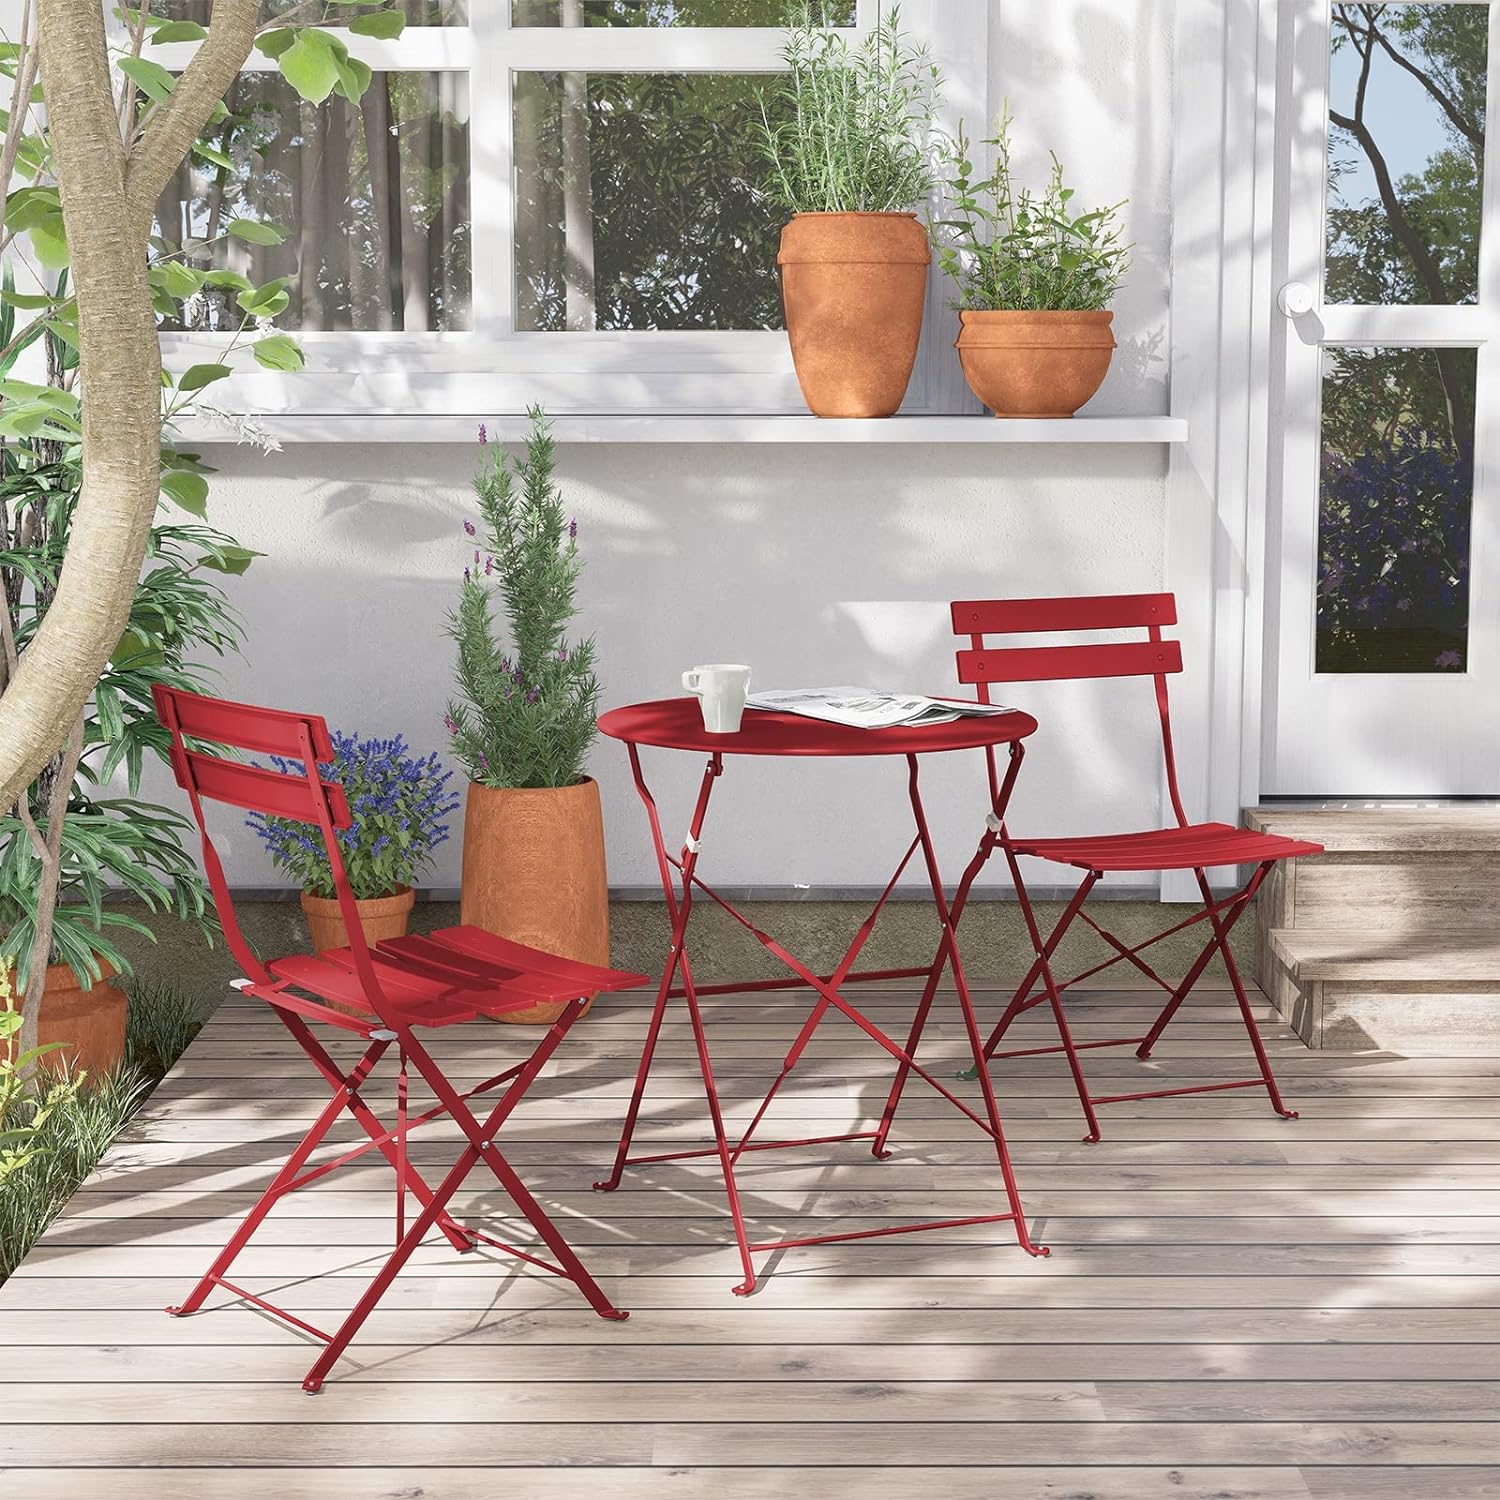 Grand Patio Metal 3-Piece Folding Bistro Table and Chairs Set, Outdoor Patio Dining Furniture for Small Spaces, Balcony, Red - image 4 of 11